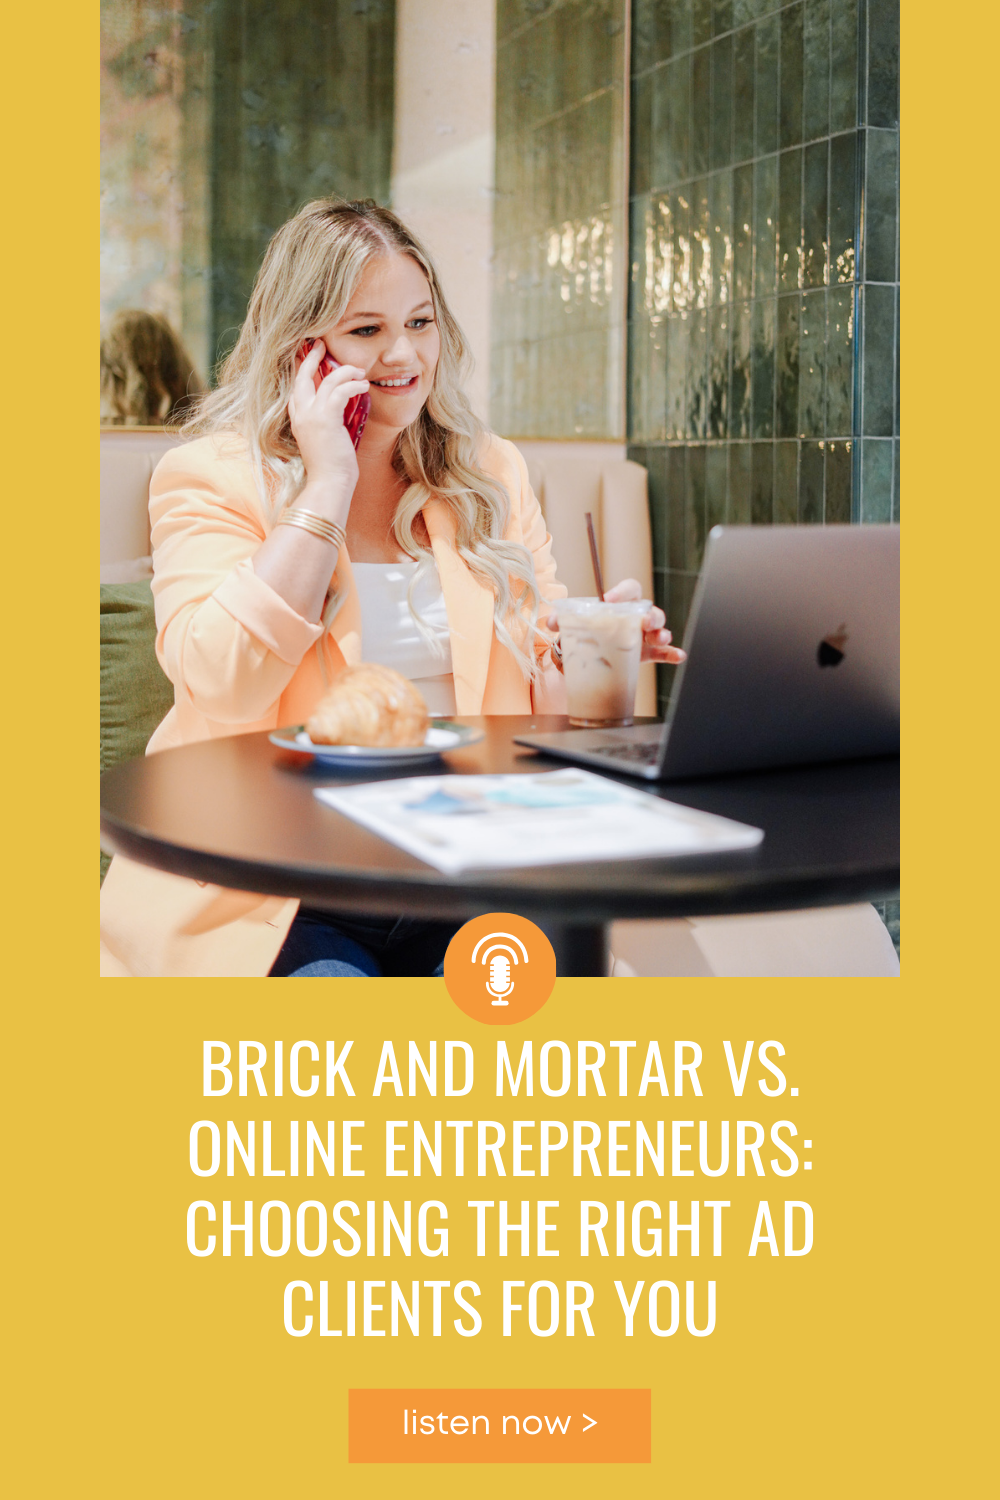 brandi sitting at a table drinking coffee and talking on the phone with the podcast title Brick and Mortar vs. Online Entrepreneurs: Choosing the Right Ad Clients For You below